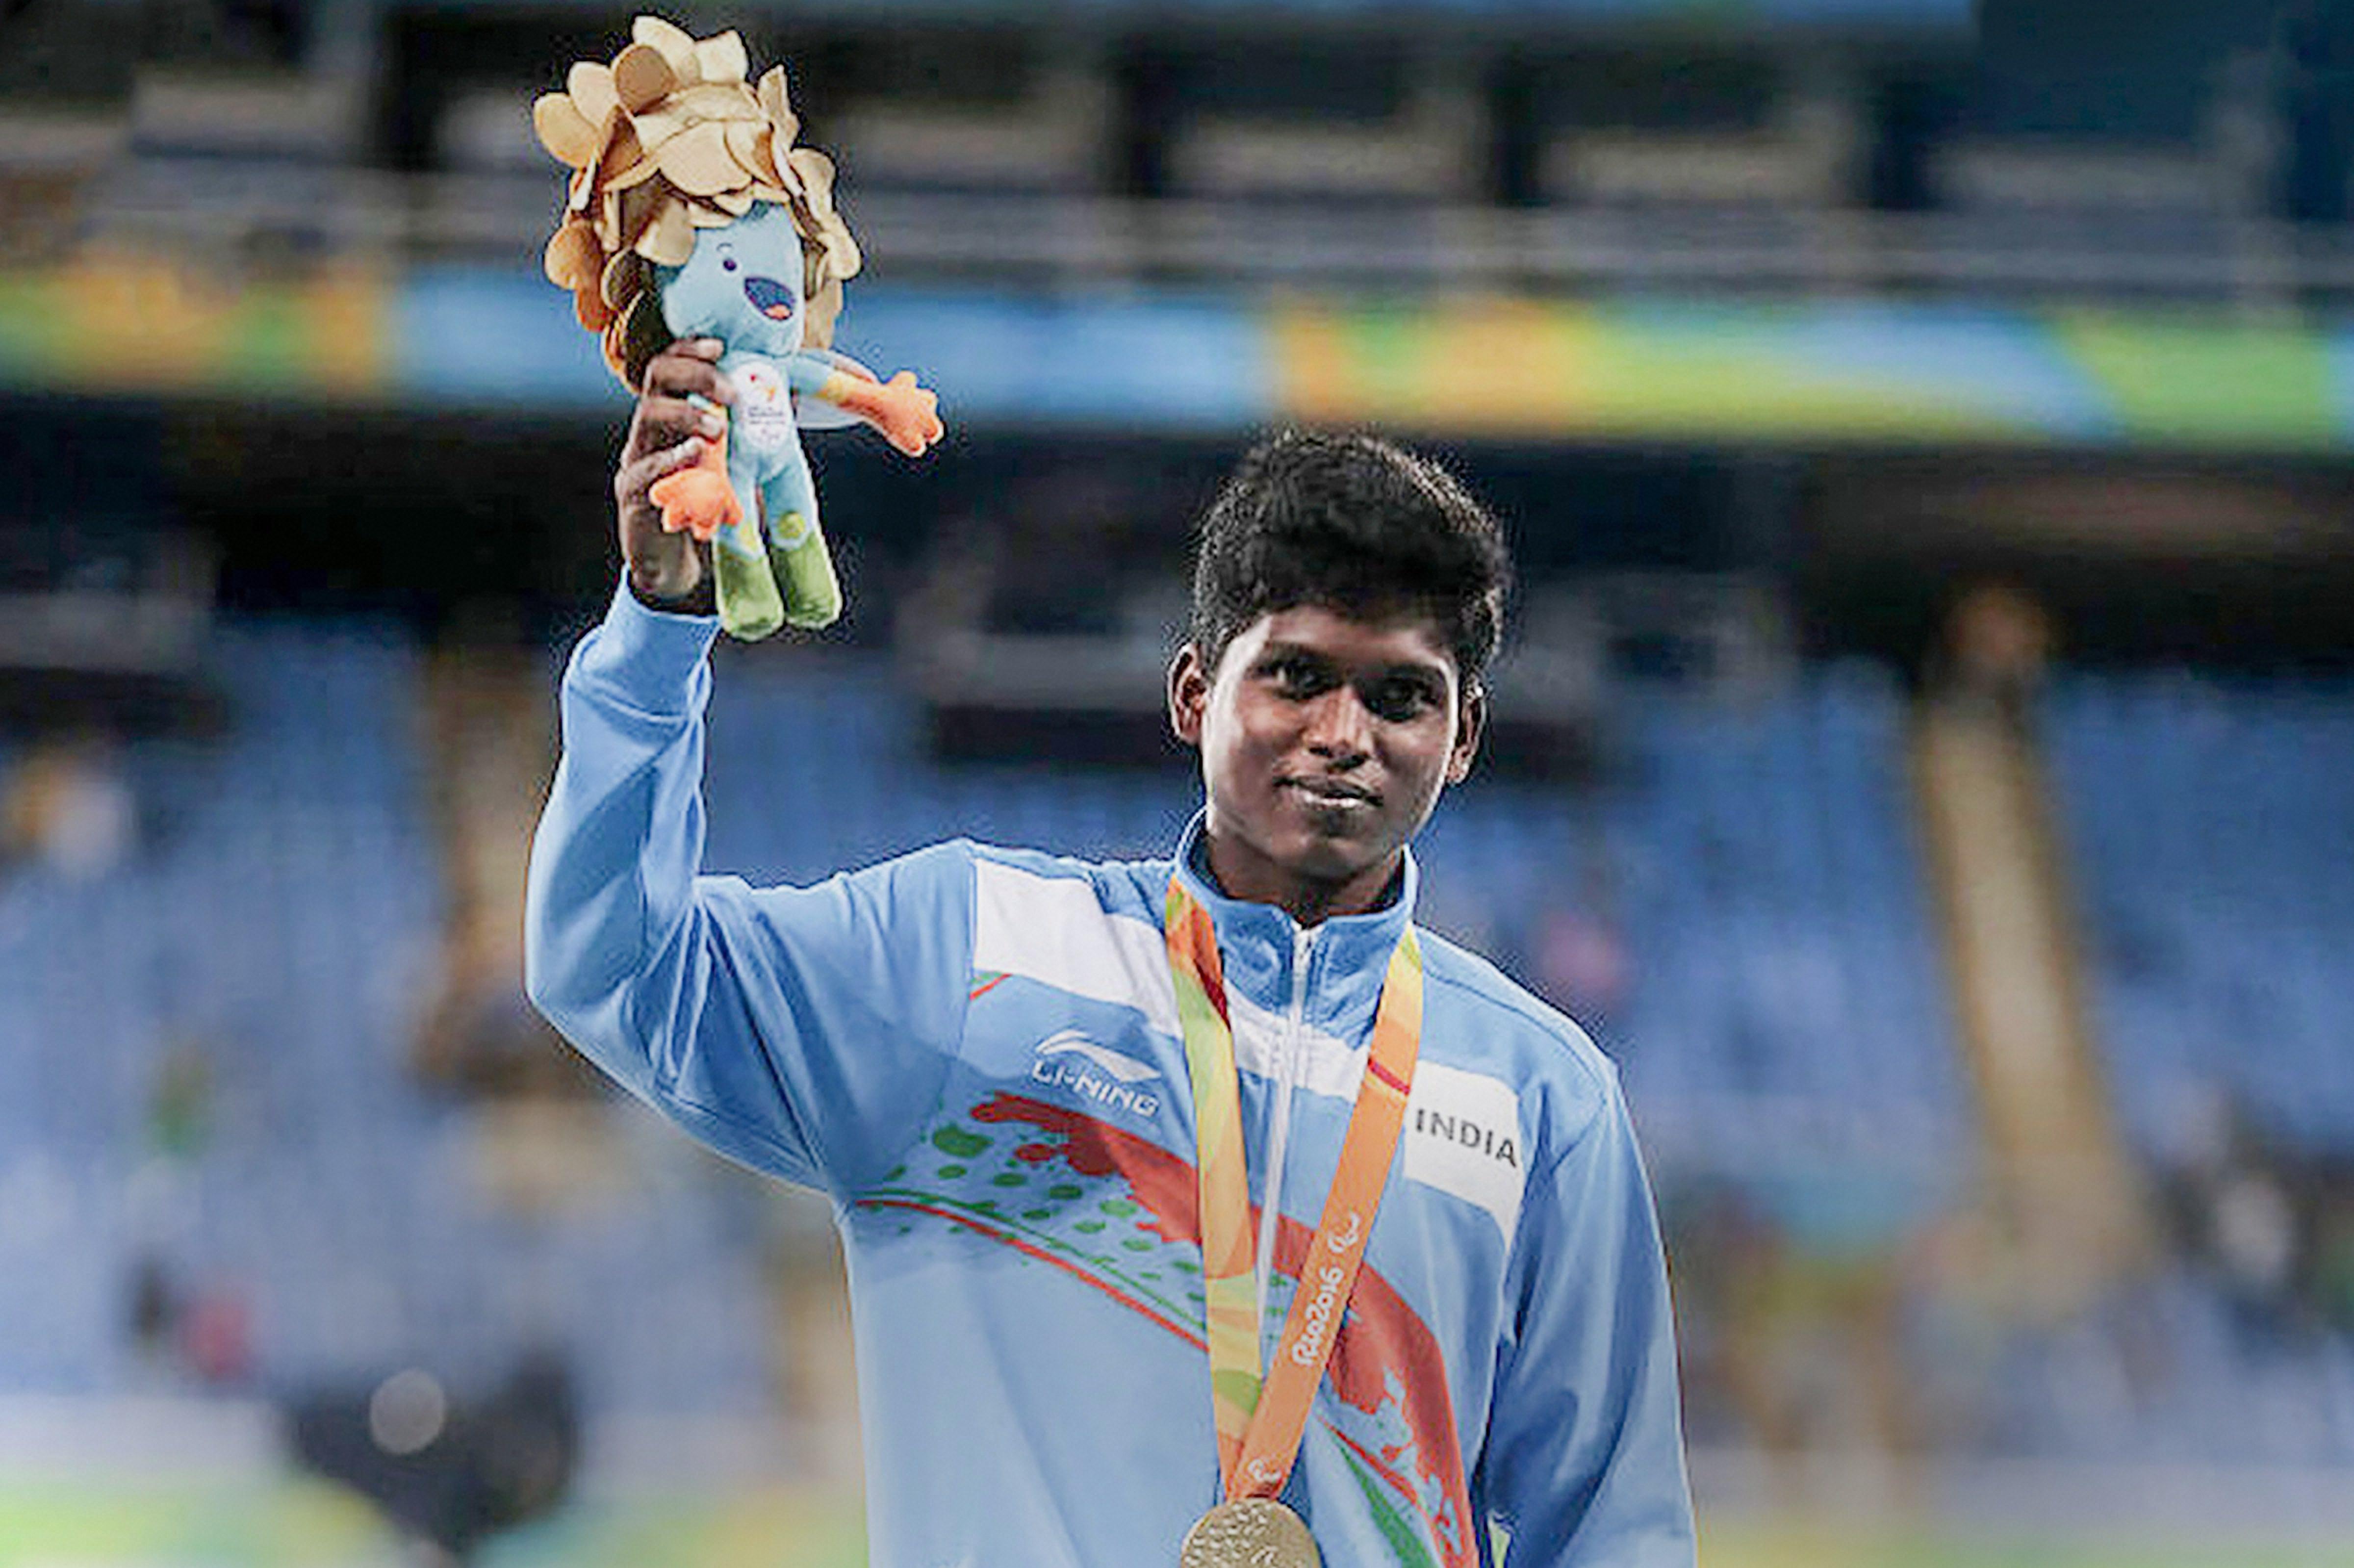 Mariyappan Thangavelu - Defending champion Mariyappan Thangavelu won a silver medal in the men's high jump T42 event at the Tokyo Paralympics. Mariyappan cleared 1.86m while the American gold winner Sam Grewe succeeded in soaring above 1.88m in his third attempt